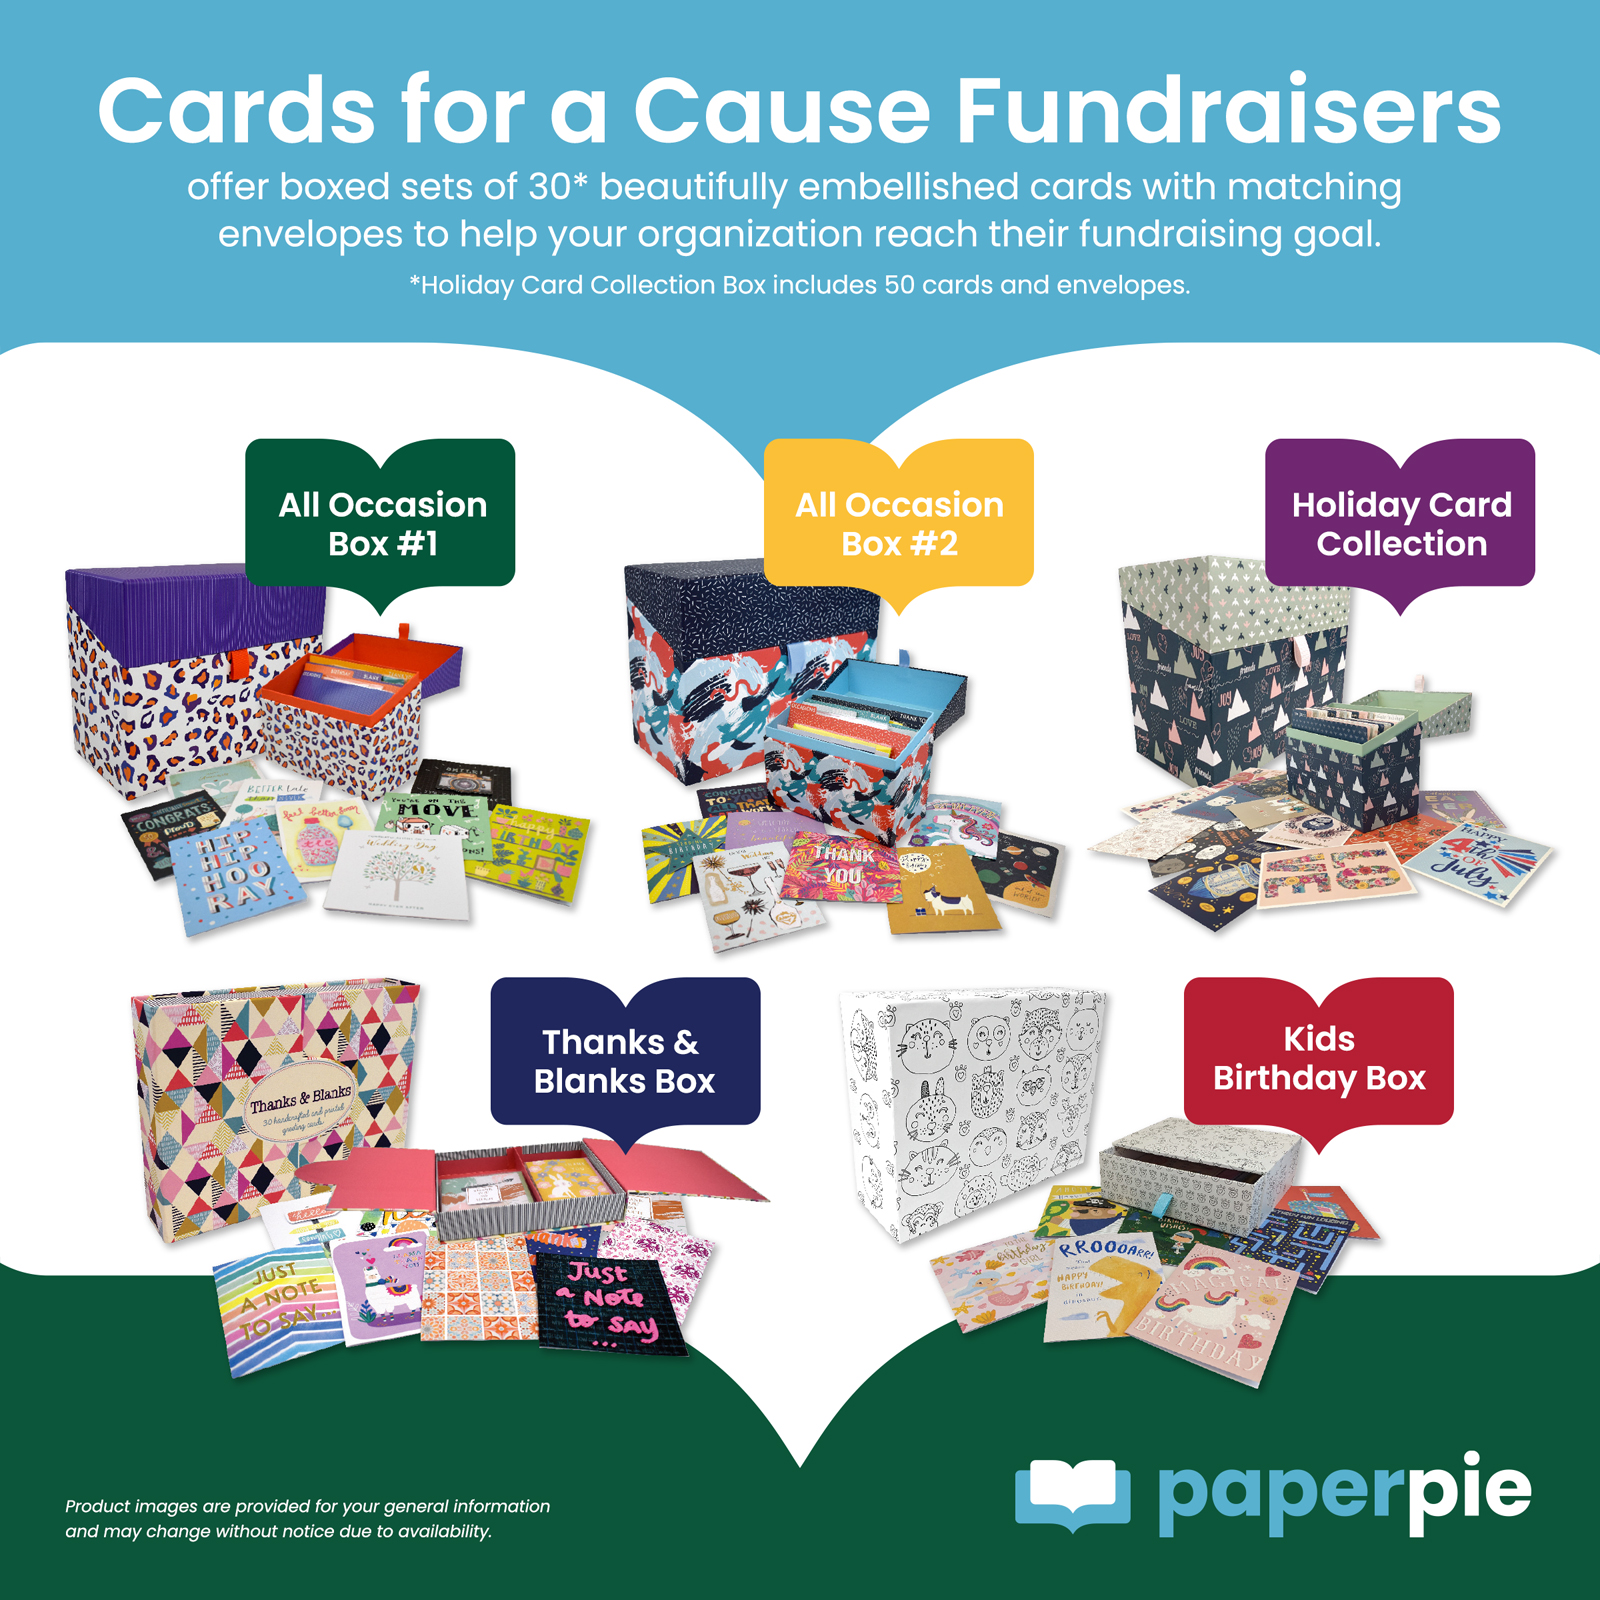 Featured image for “Cards for a Cause”